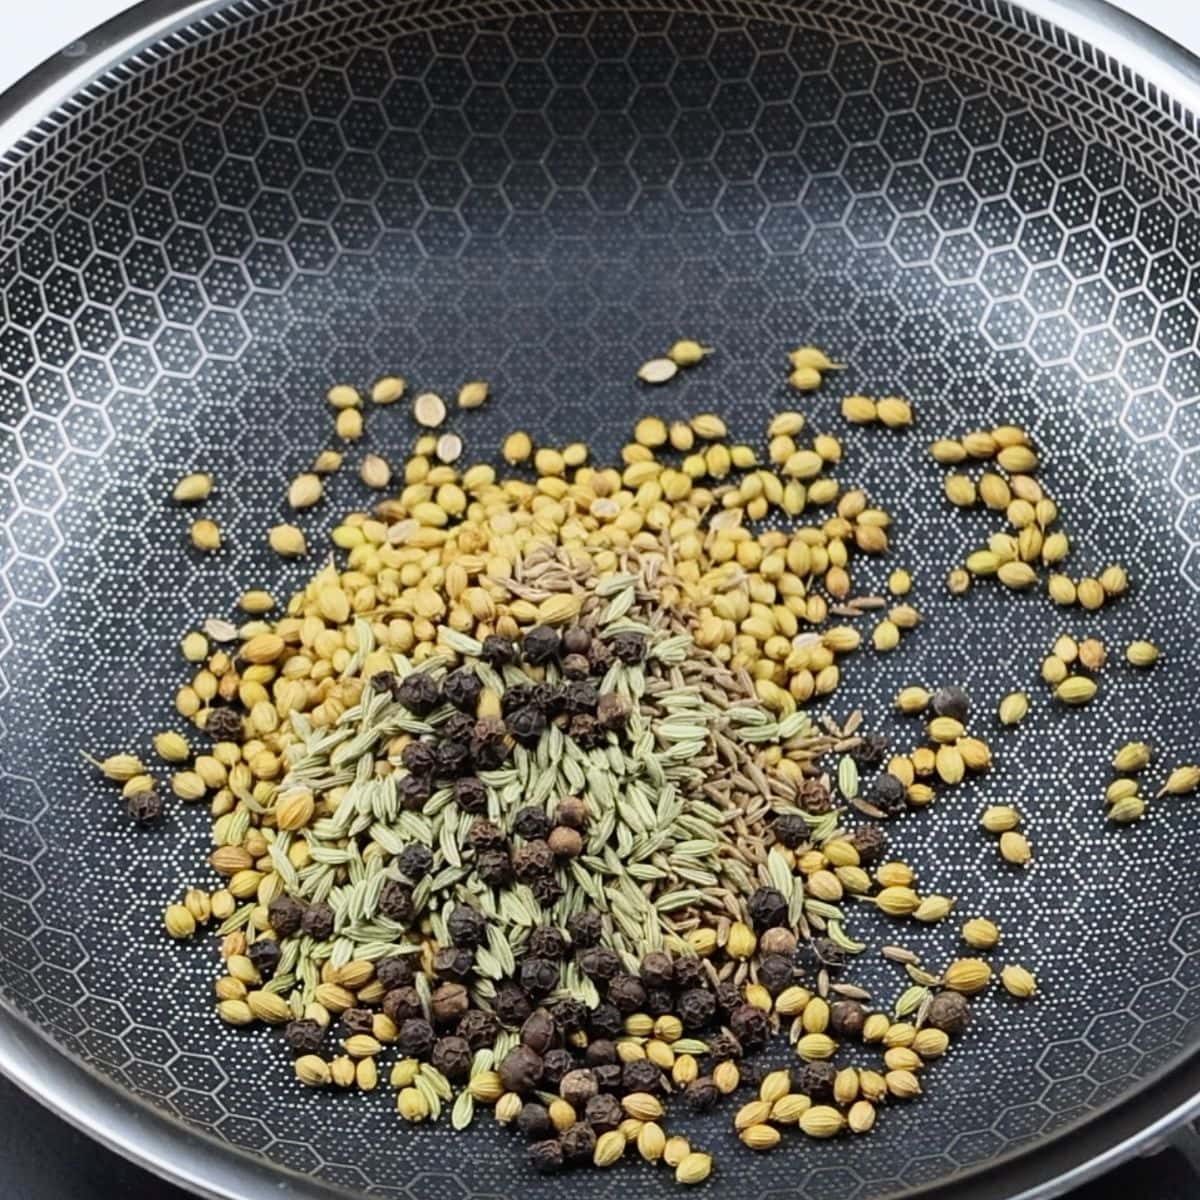 Roast the spices in a pan